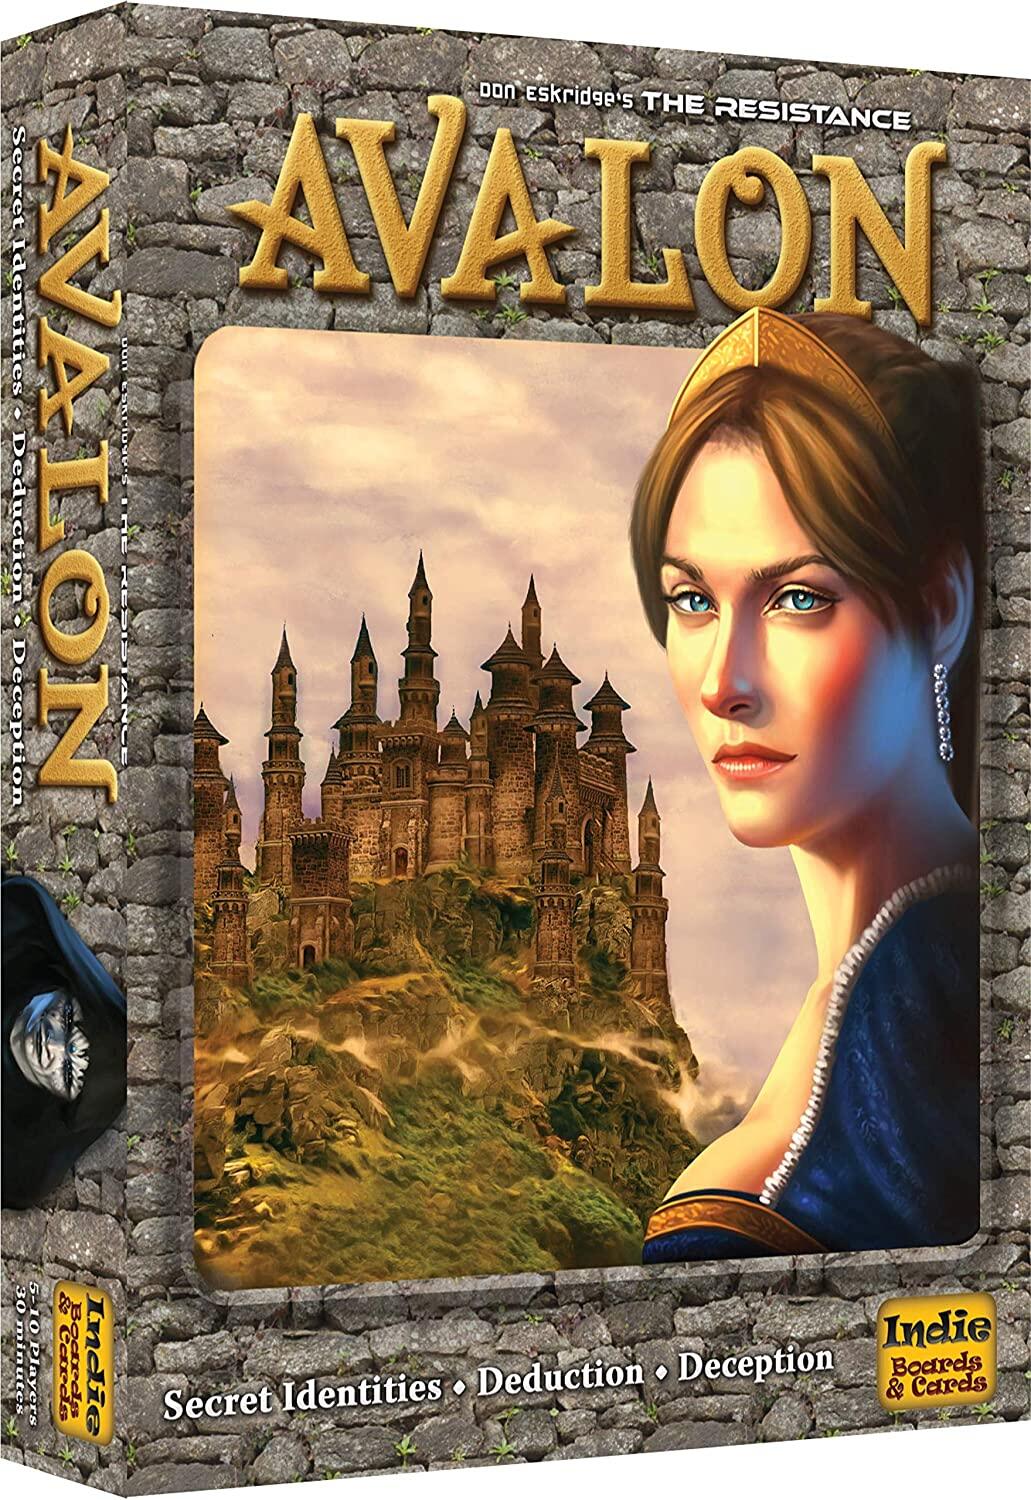 Board games推介7：阿瓦隆（The Resistance：Avalon）